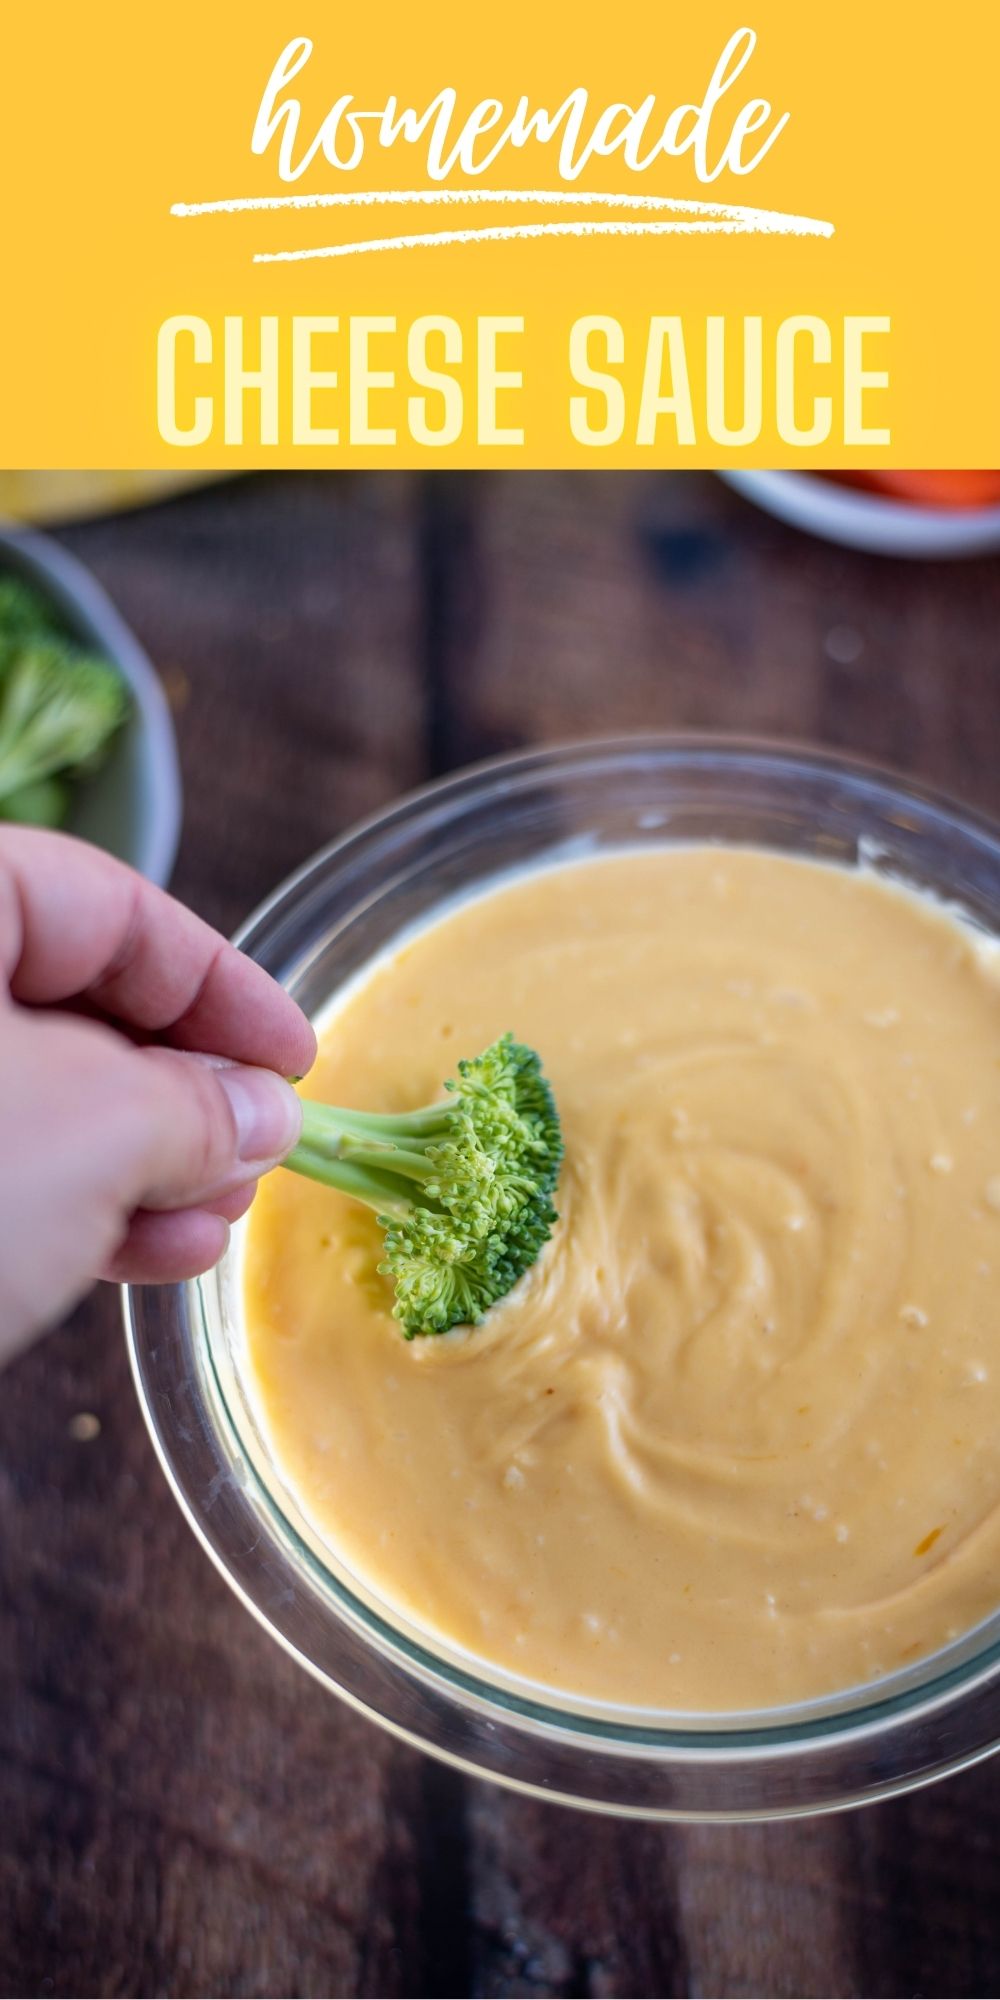 Cheese sauce in a bowl with a piece of broccoli being dipped into it 